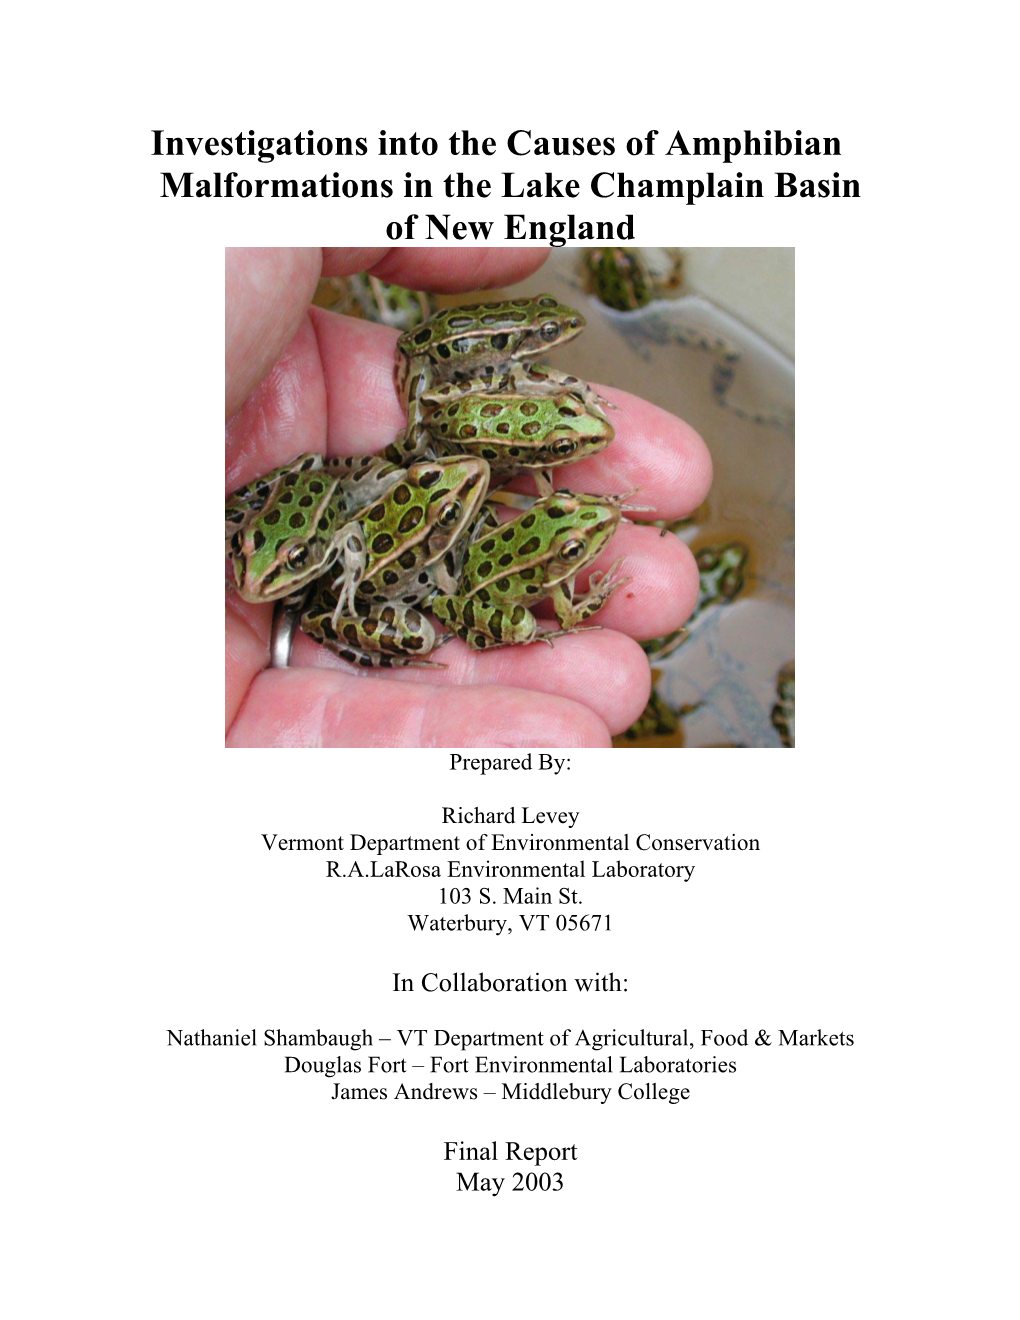 Investigations Into the Causes of Amphibian Malformations in the Lake Champlain Basin of New England